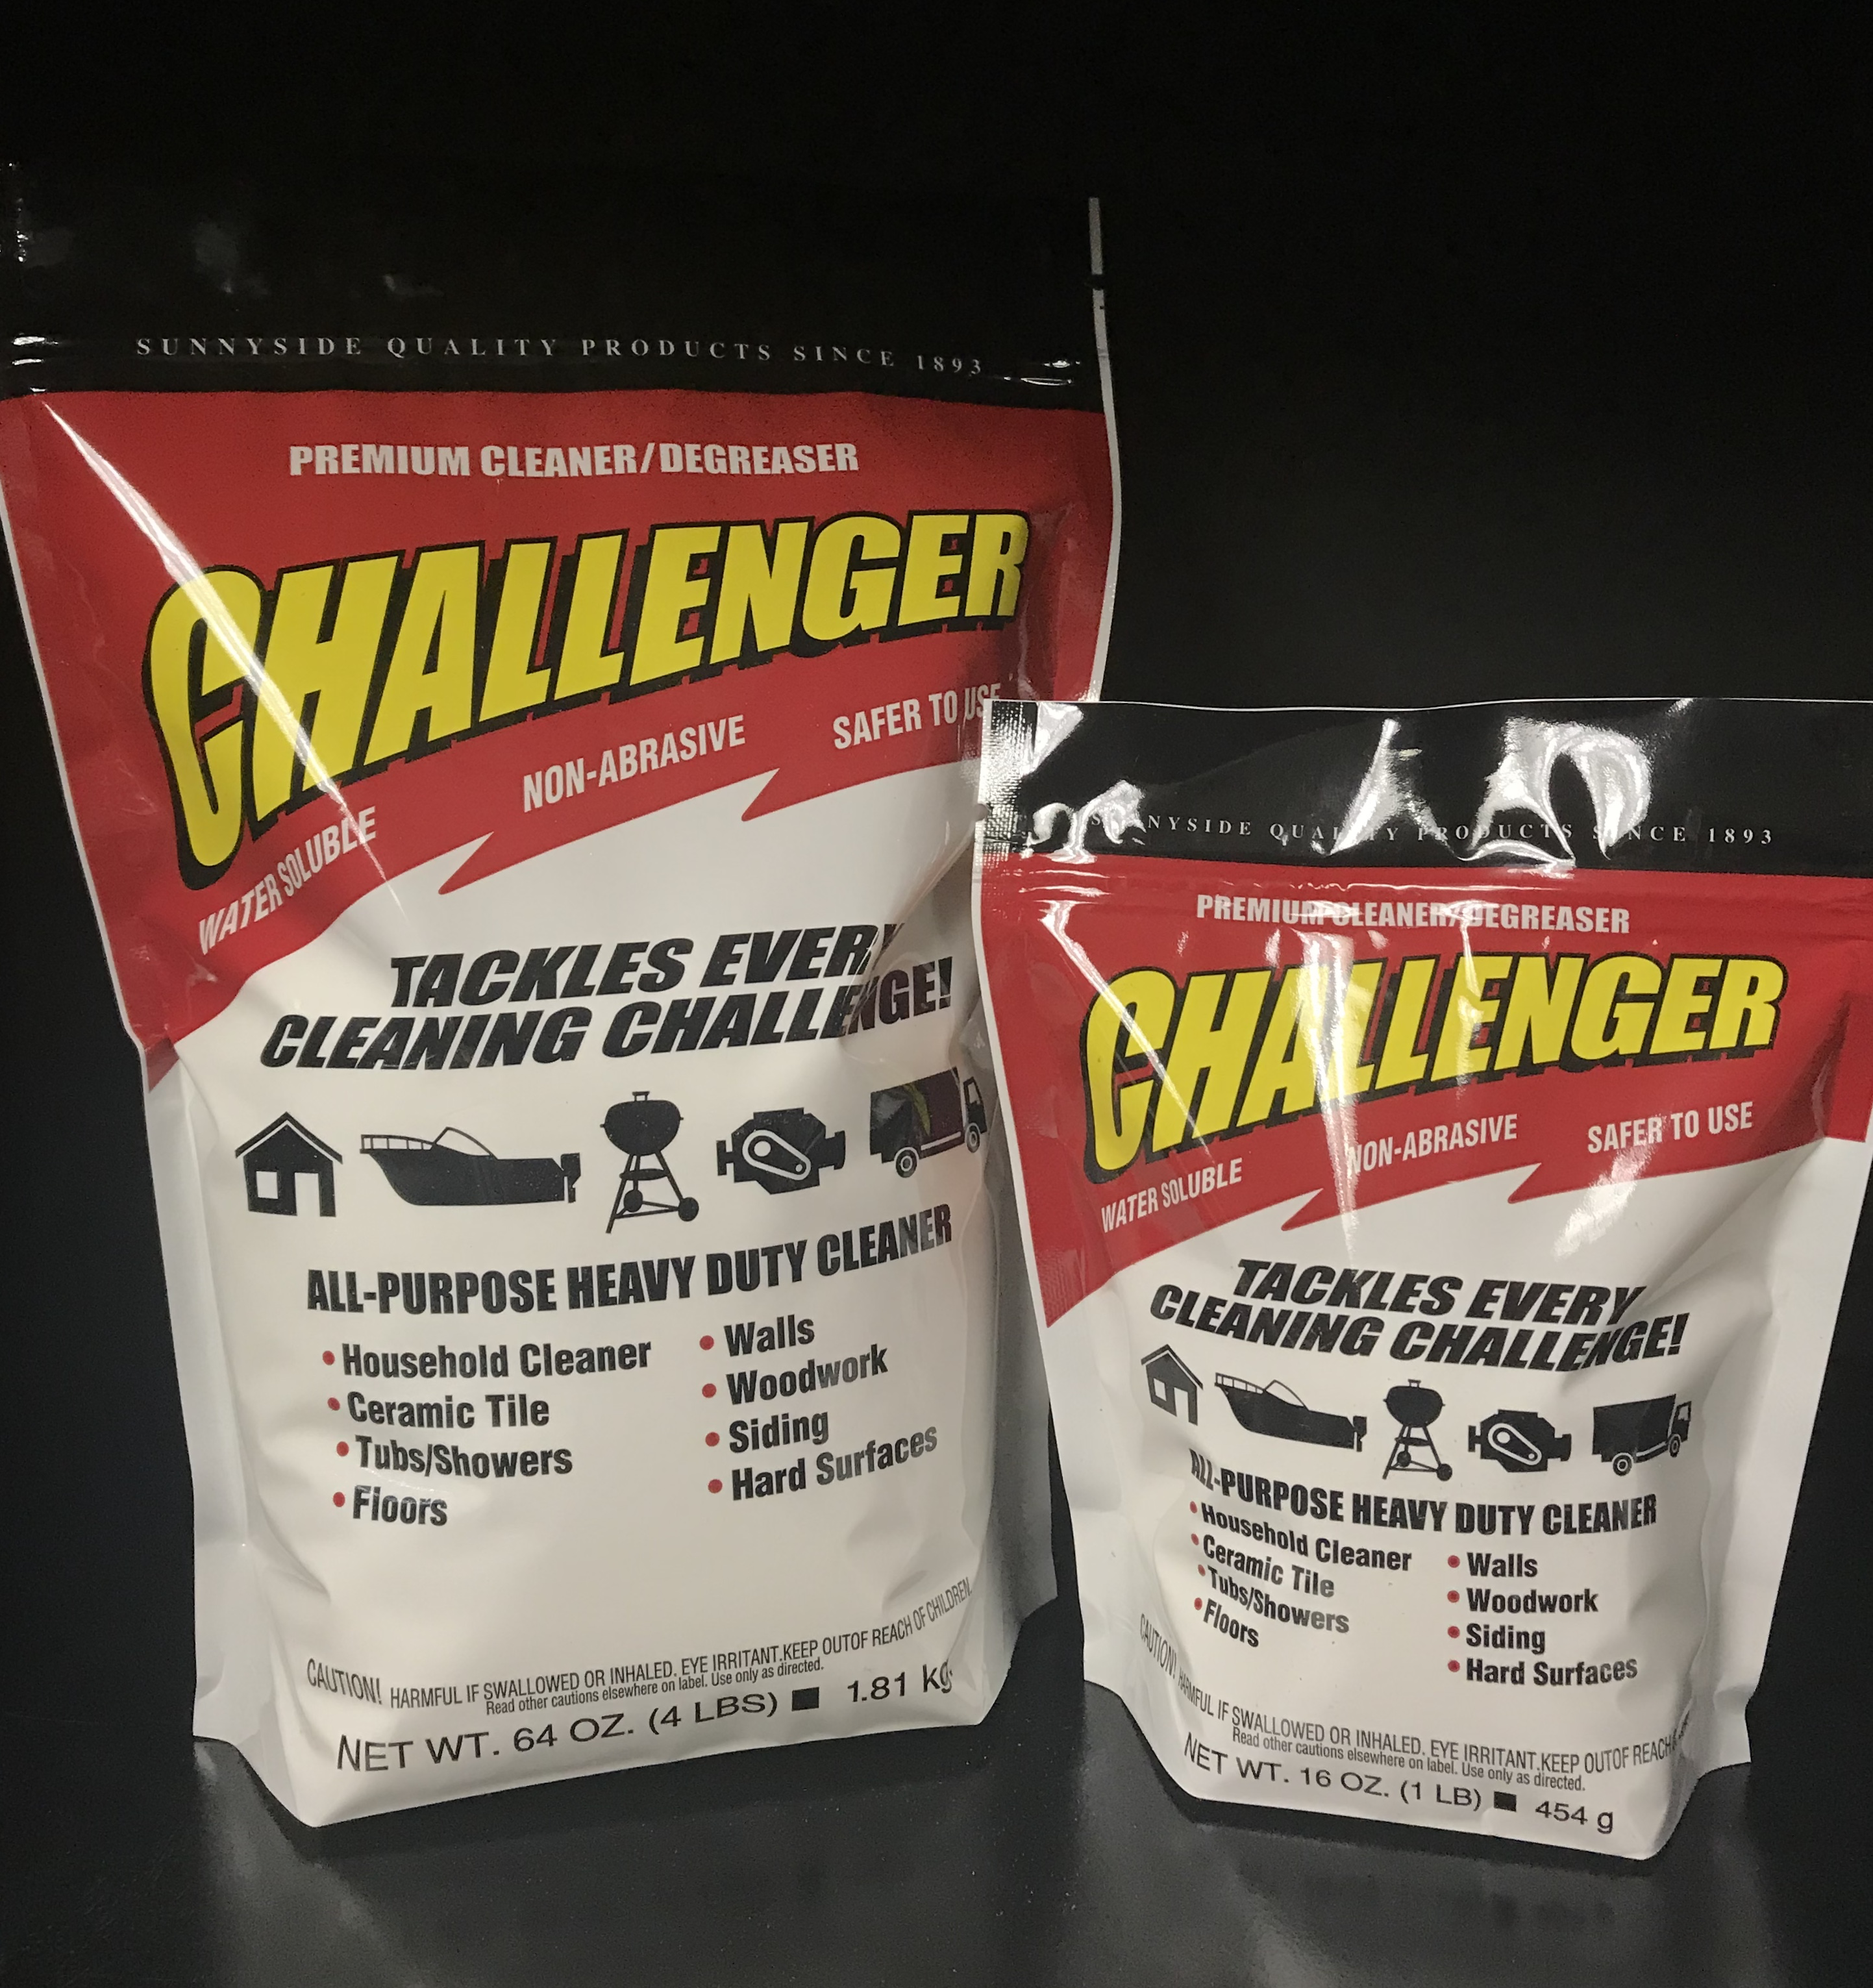 CHALLENGER ALL-PURPOSE HEAVY DUTY CLEANER Product Image